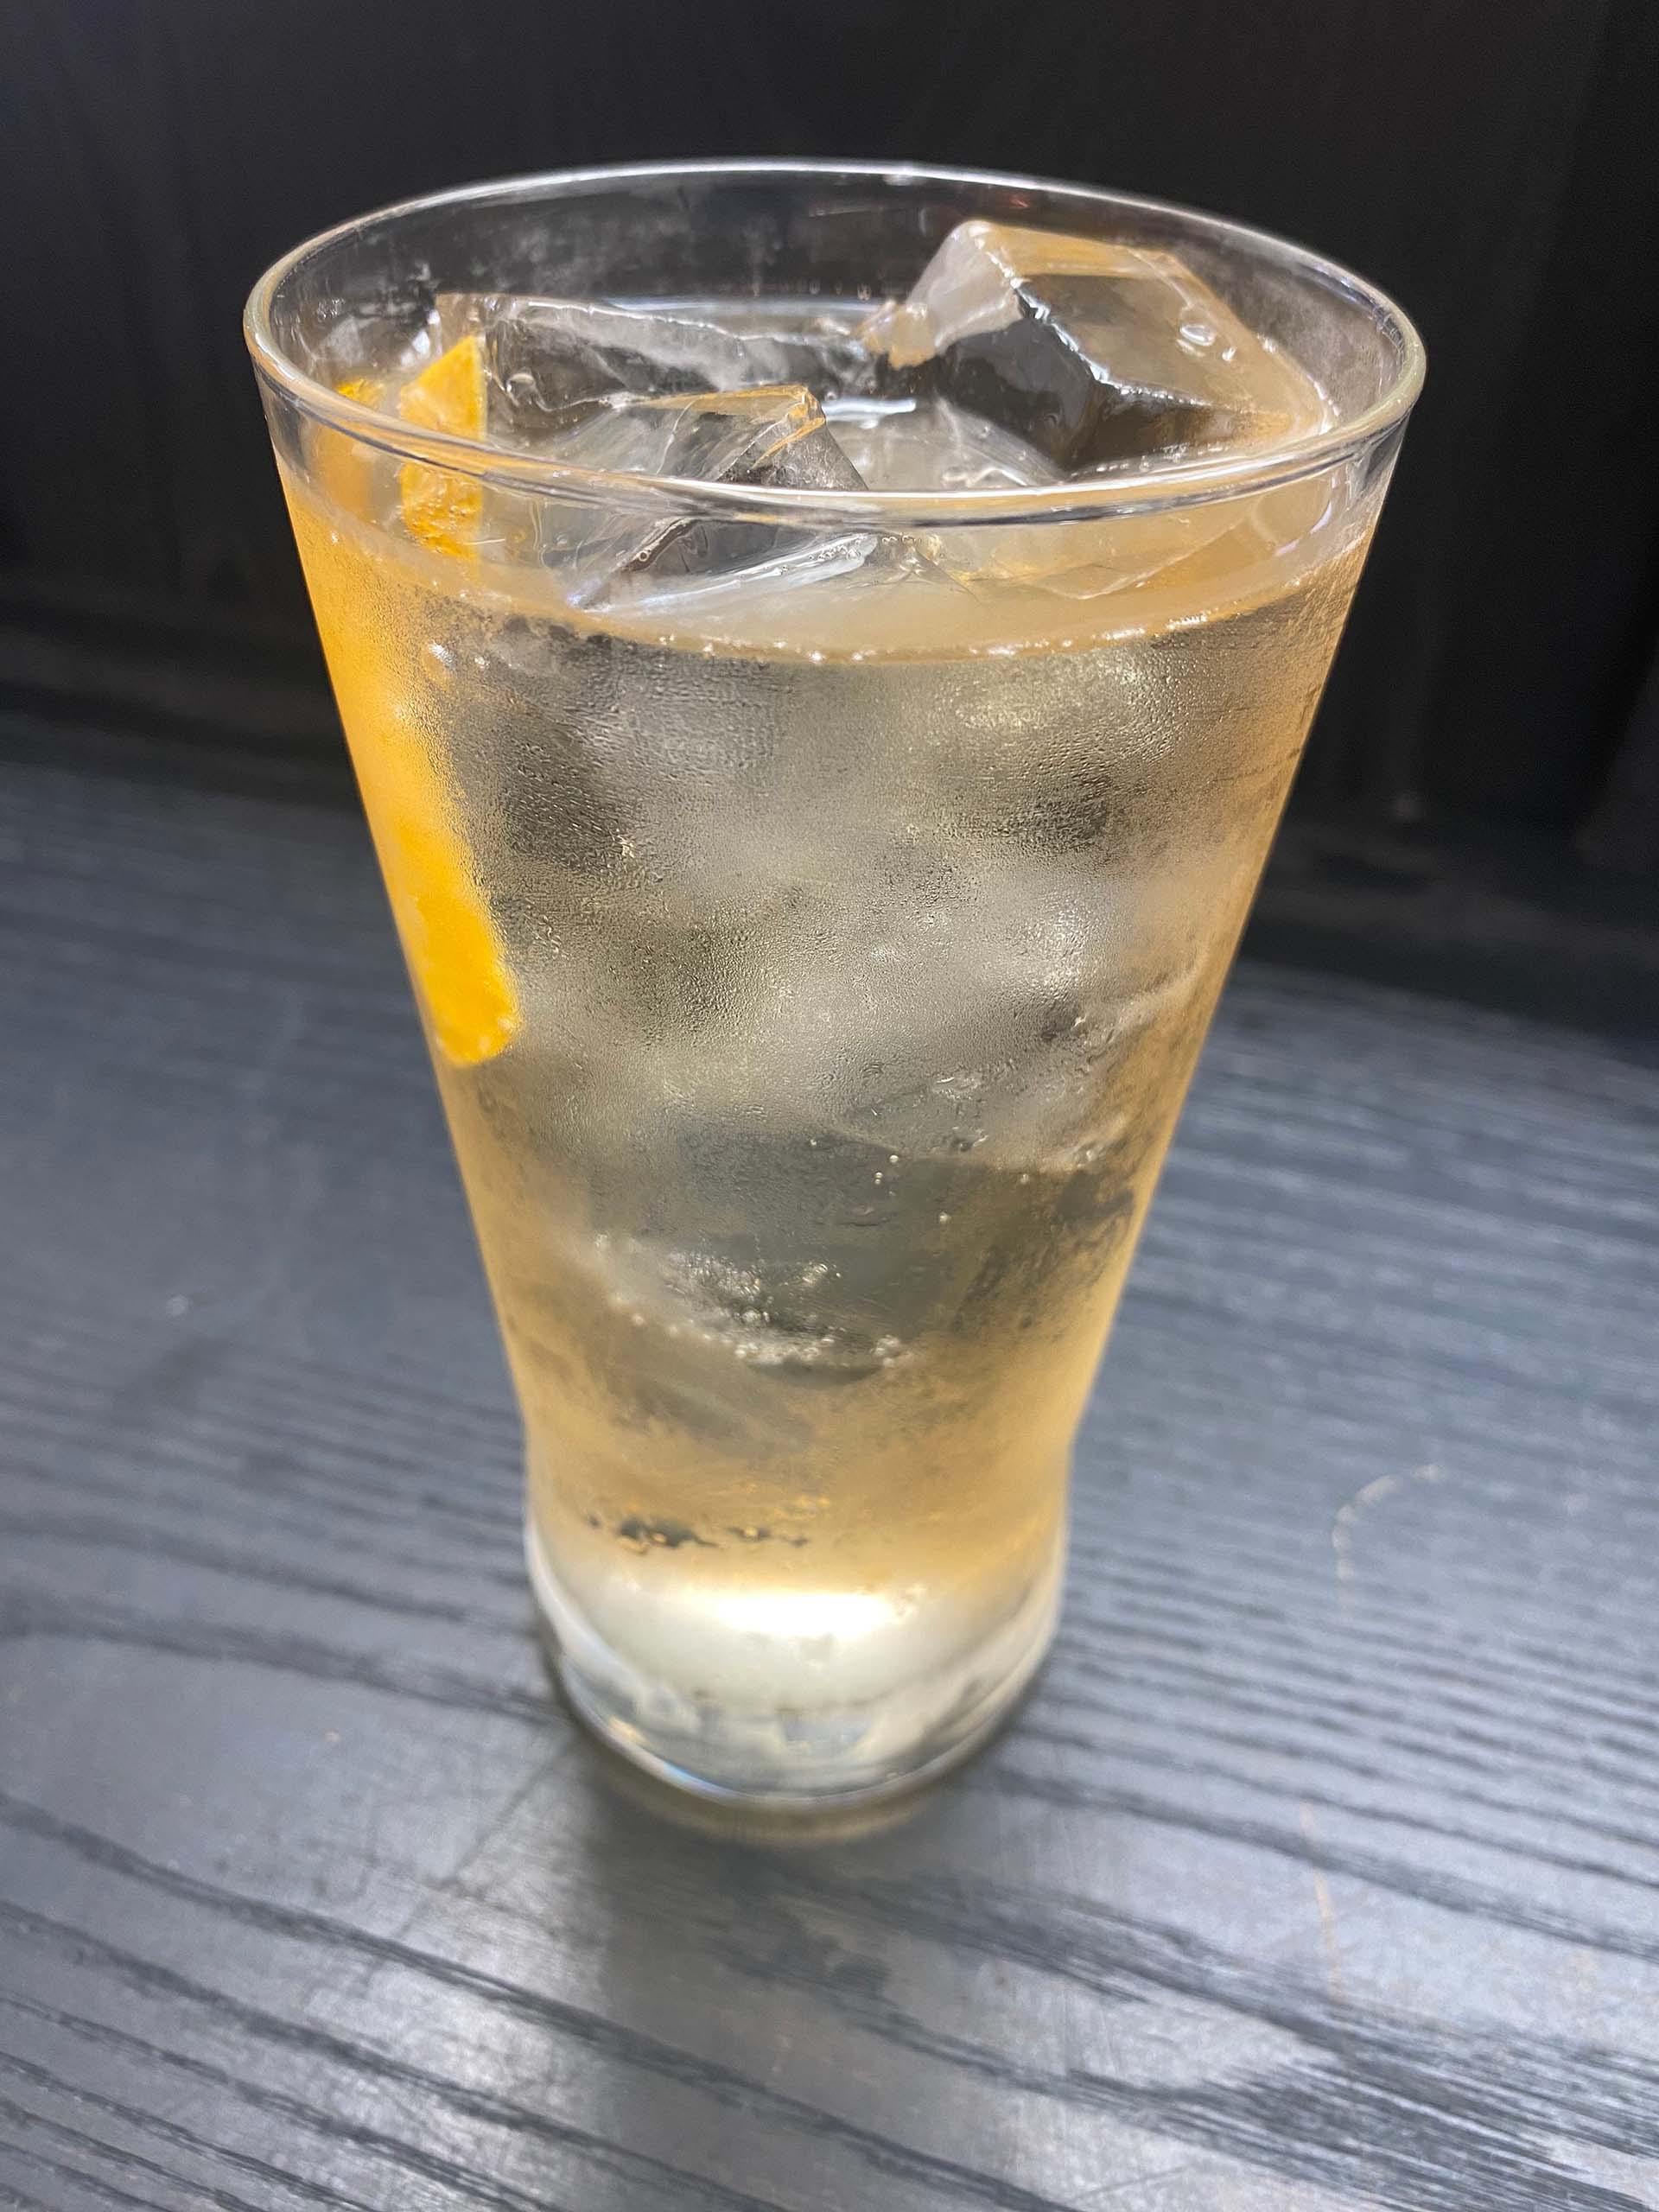 A whisky highball in a tall glass, garnished with a slice of lemon peel.